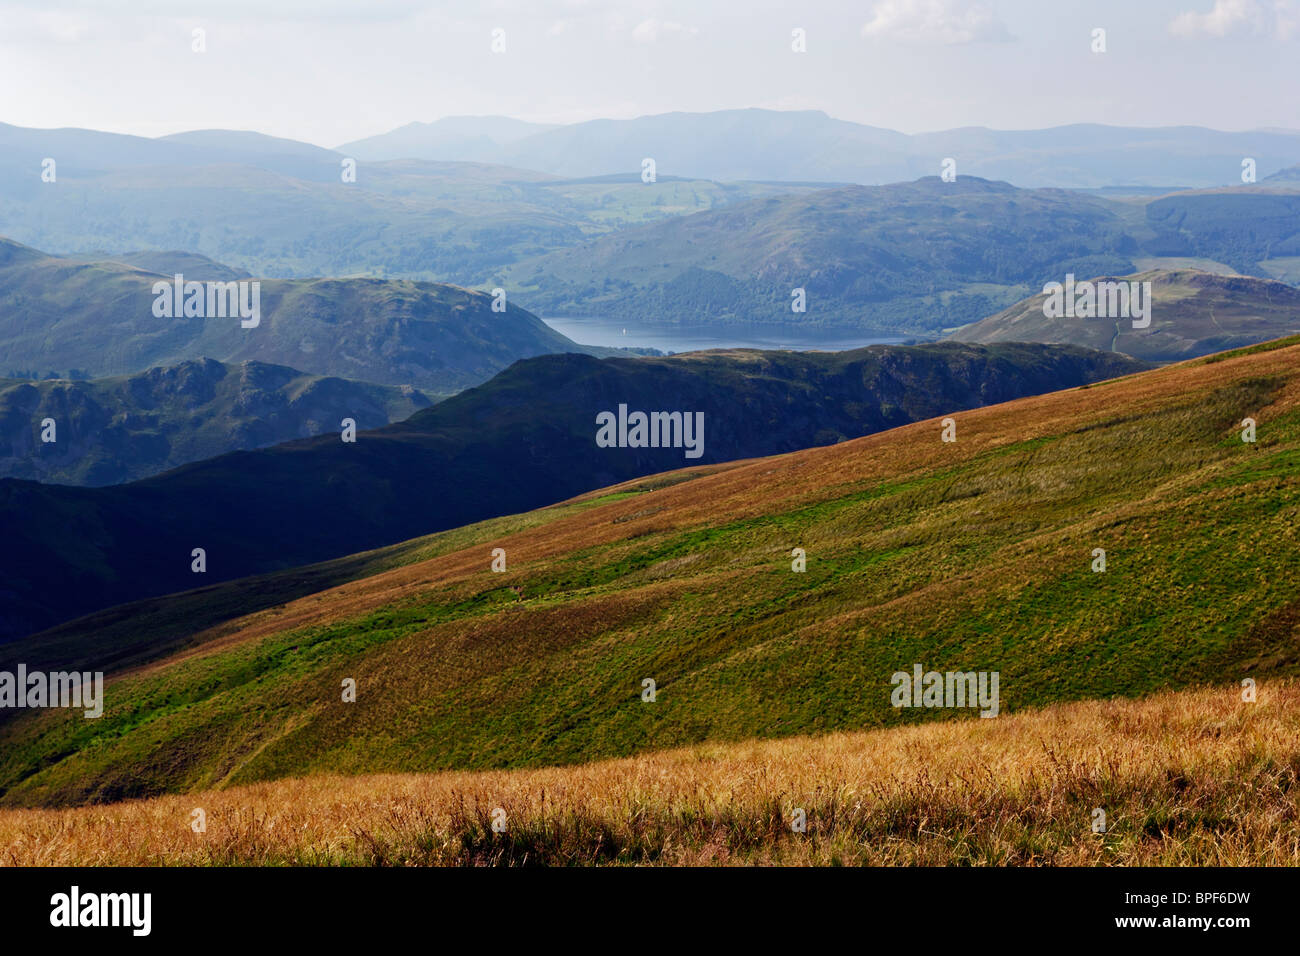 Ullswater, Steel Knotts and surrounding fells seen from Loadpot Hill in the Lake District National Park, Cumbria. Stock Photo